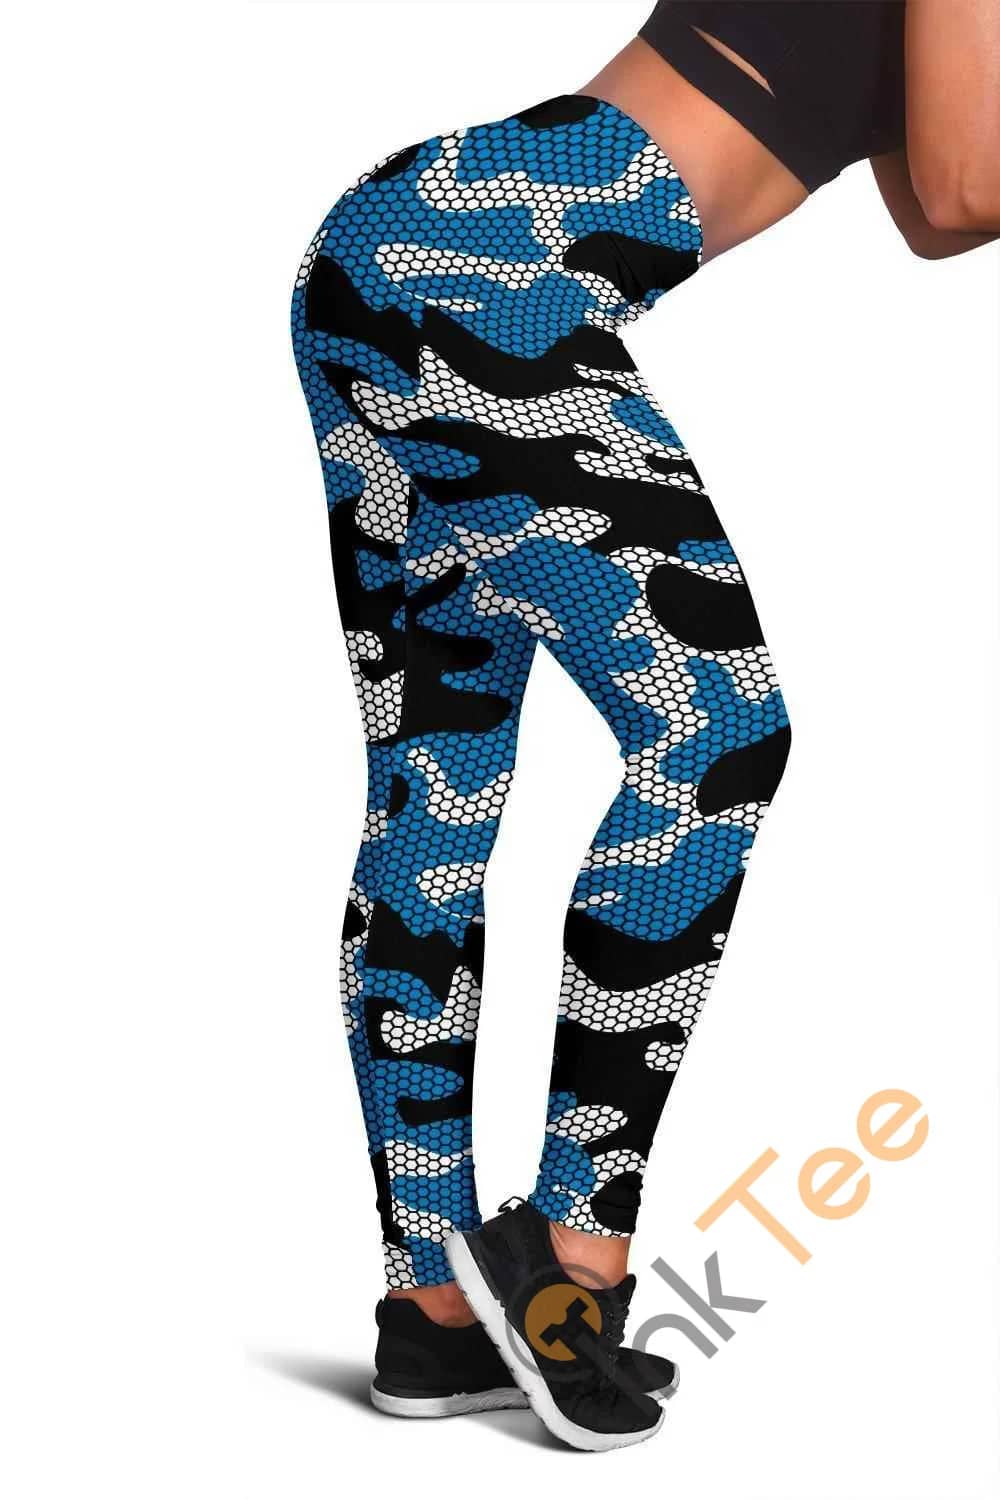 Carolina Panthers Inspired Hex Camo 3D All Over Print For Yoga Fitness Fashion Women's Leggings